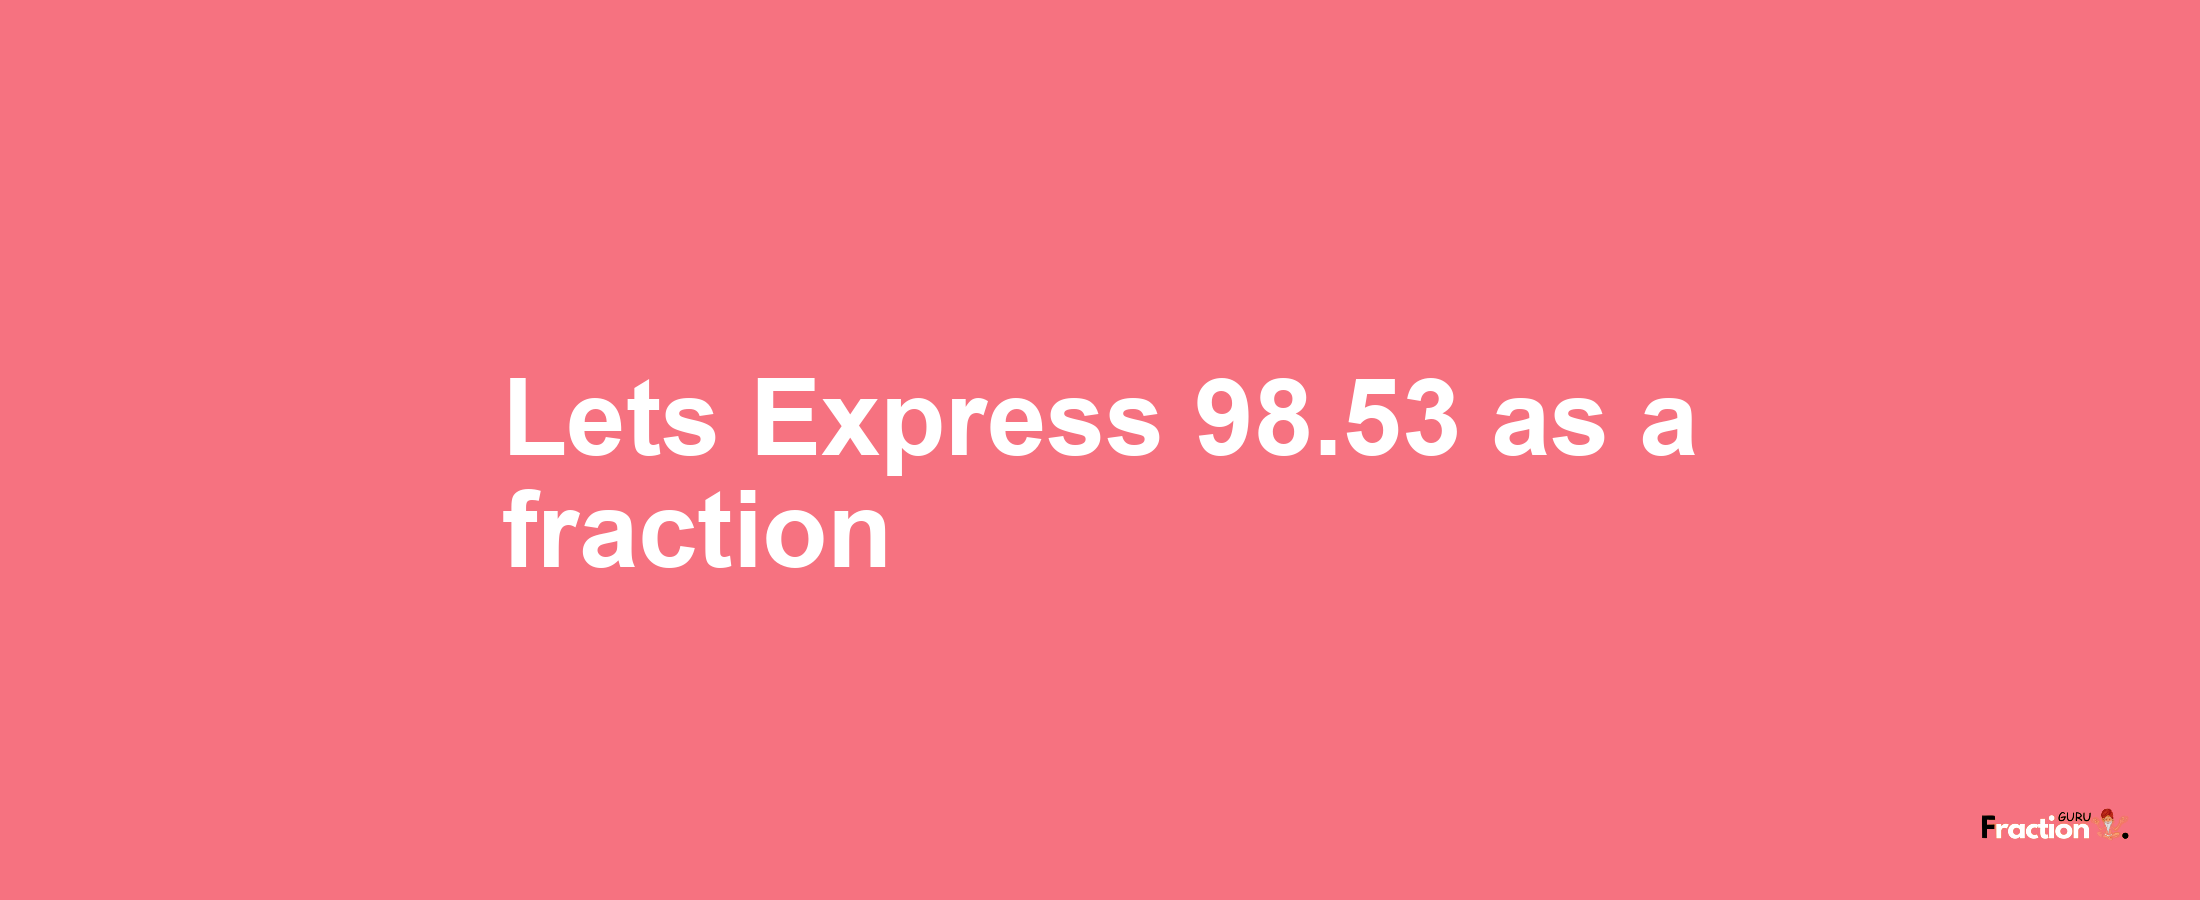 Lets Express 98.53 as afraction